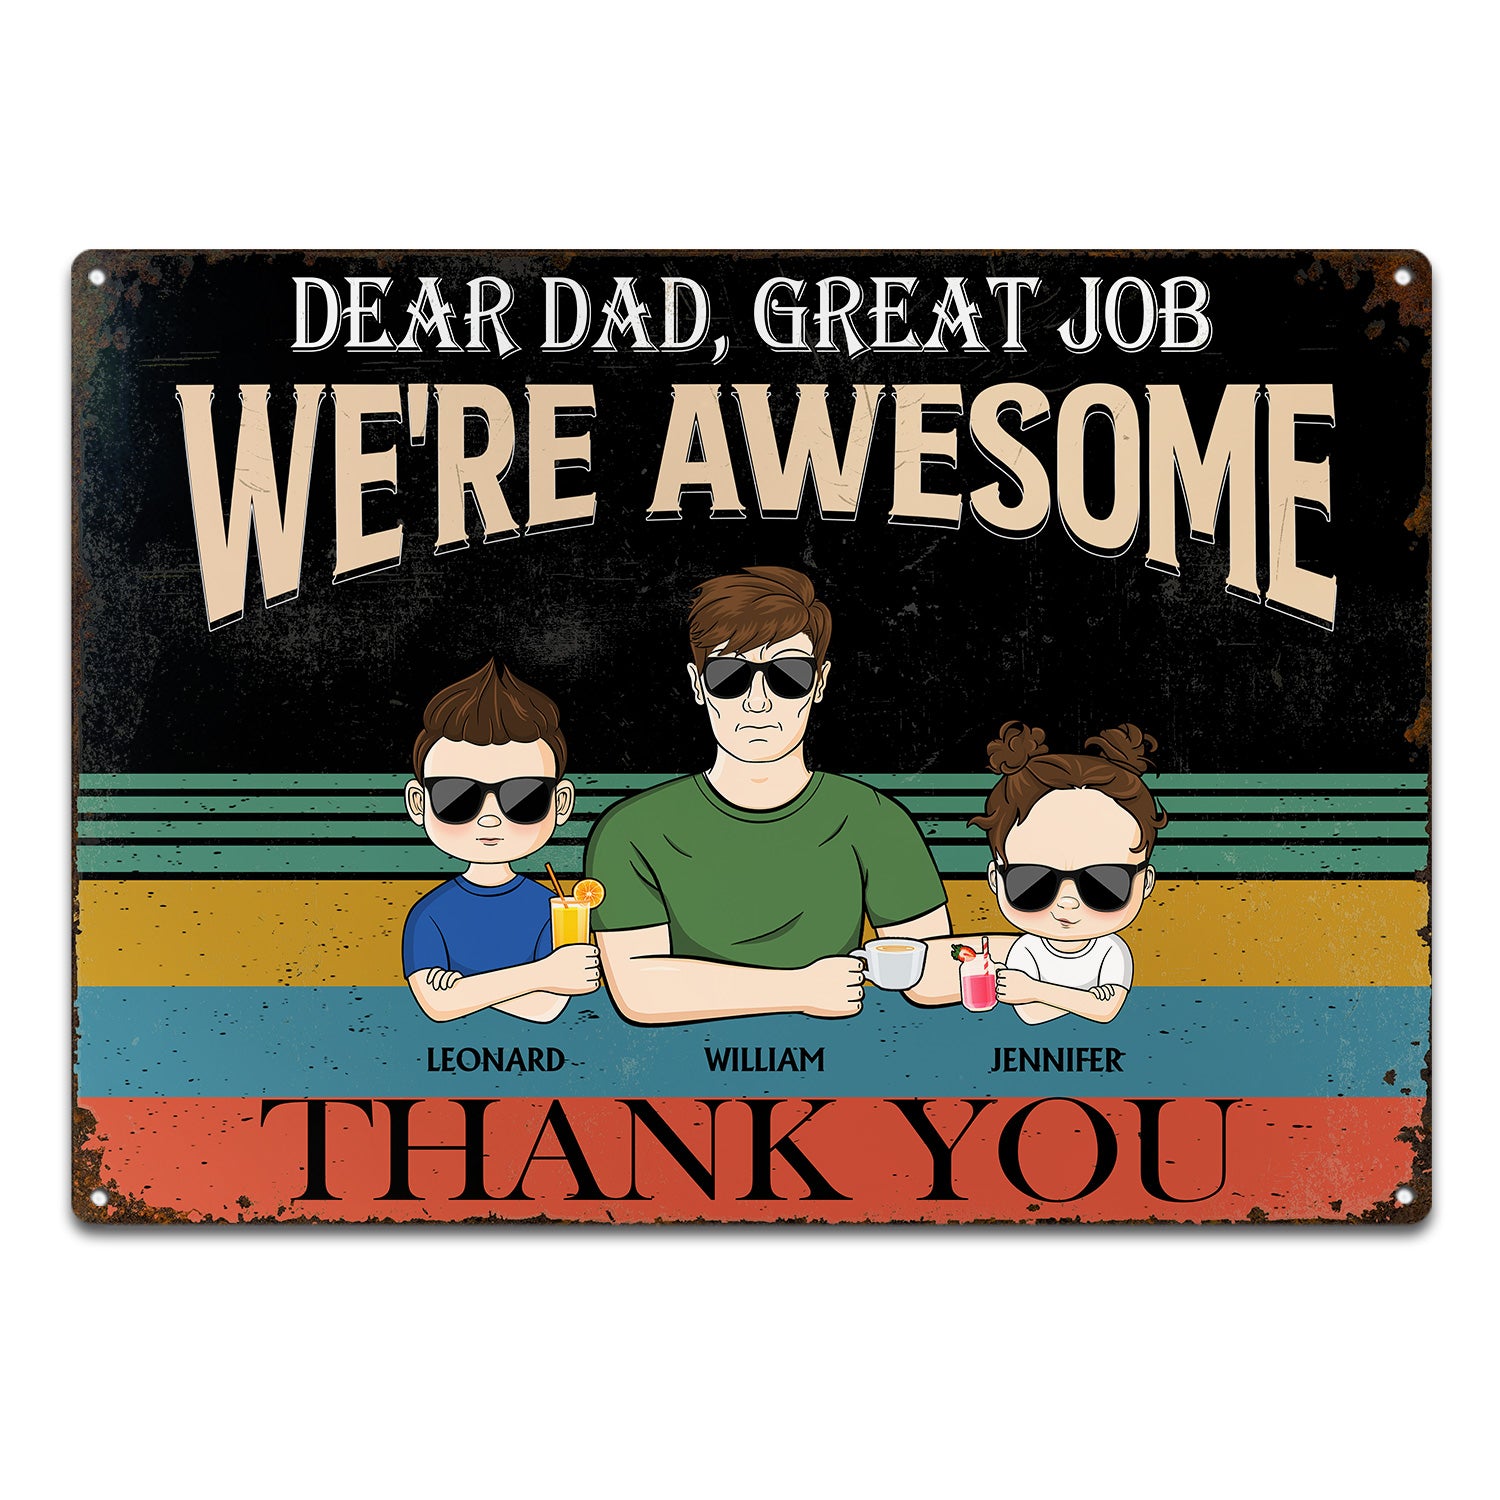 Dear Dad Great Job We're Awesome Thank You Young - Birthday, Loving Gift For Dad, Father, Grandpa, Grandfather - Personalized Custom Classic Metal Signs